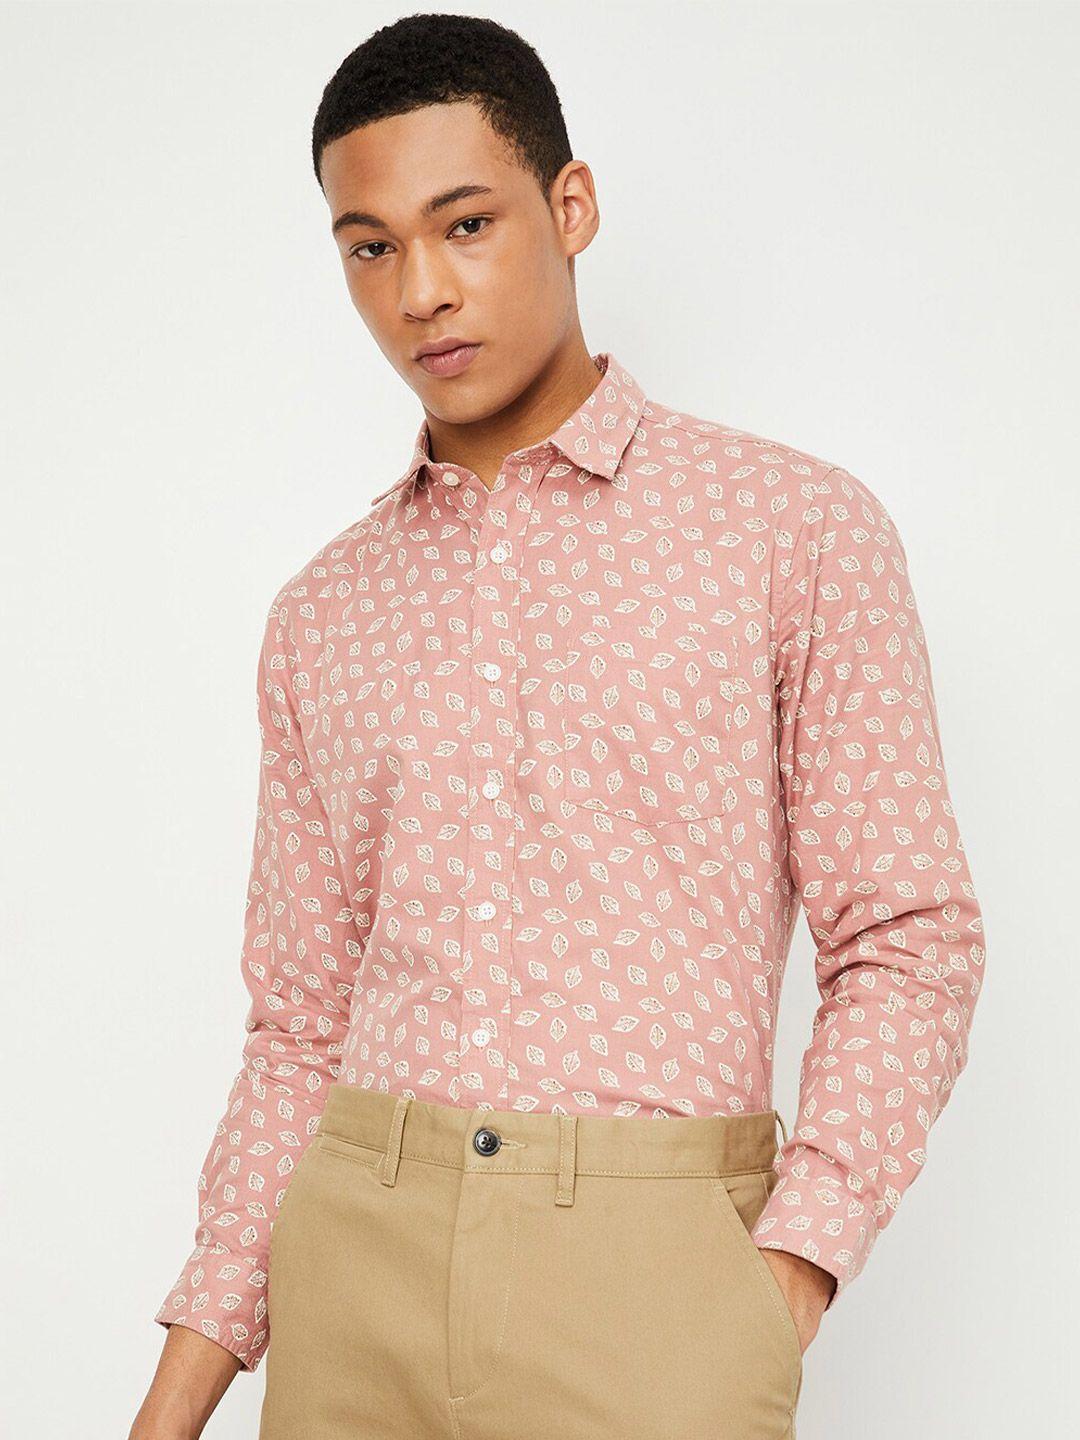 max-floral-printed-pure-cotton-casual-shirt